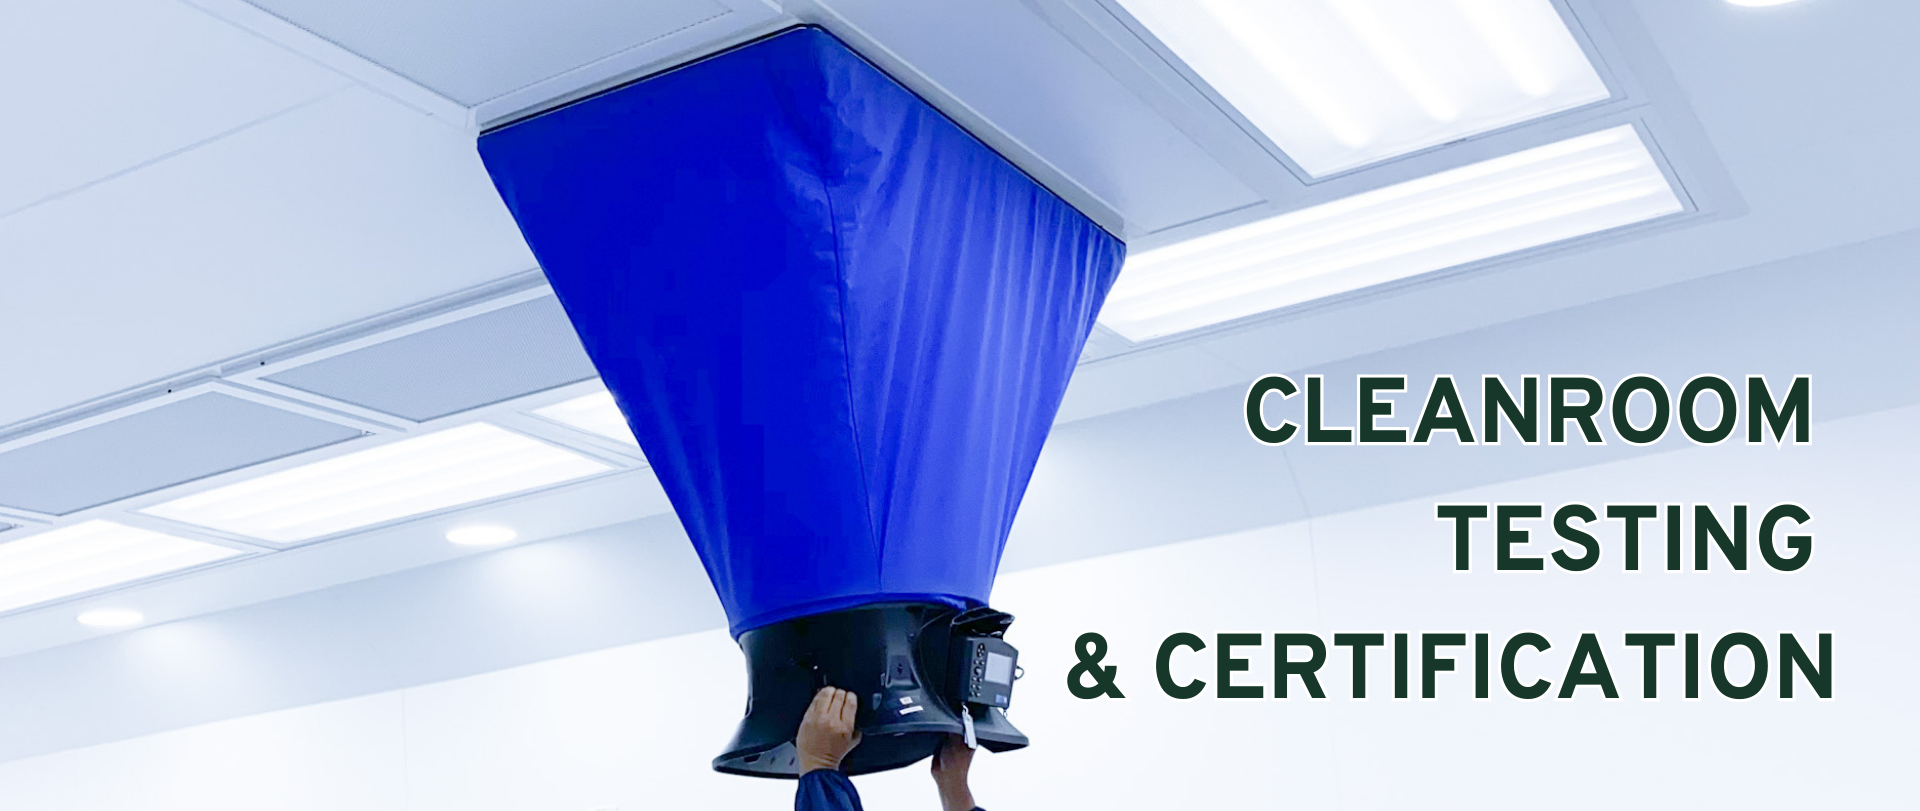 CLEANROOM TESTING CERTIFICATION